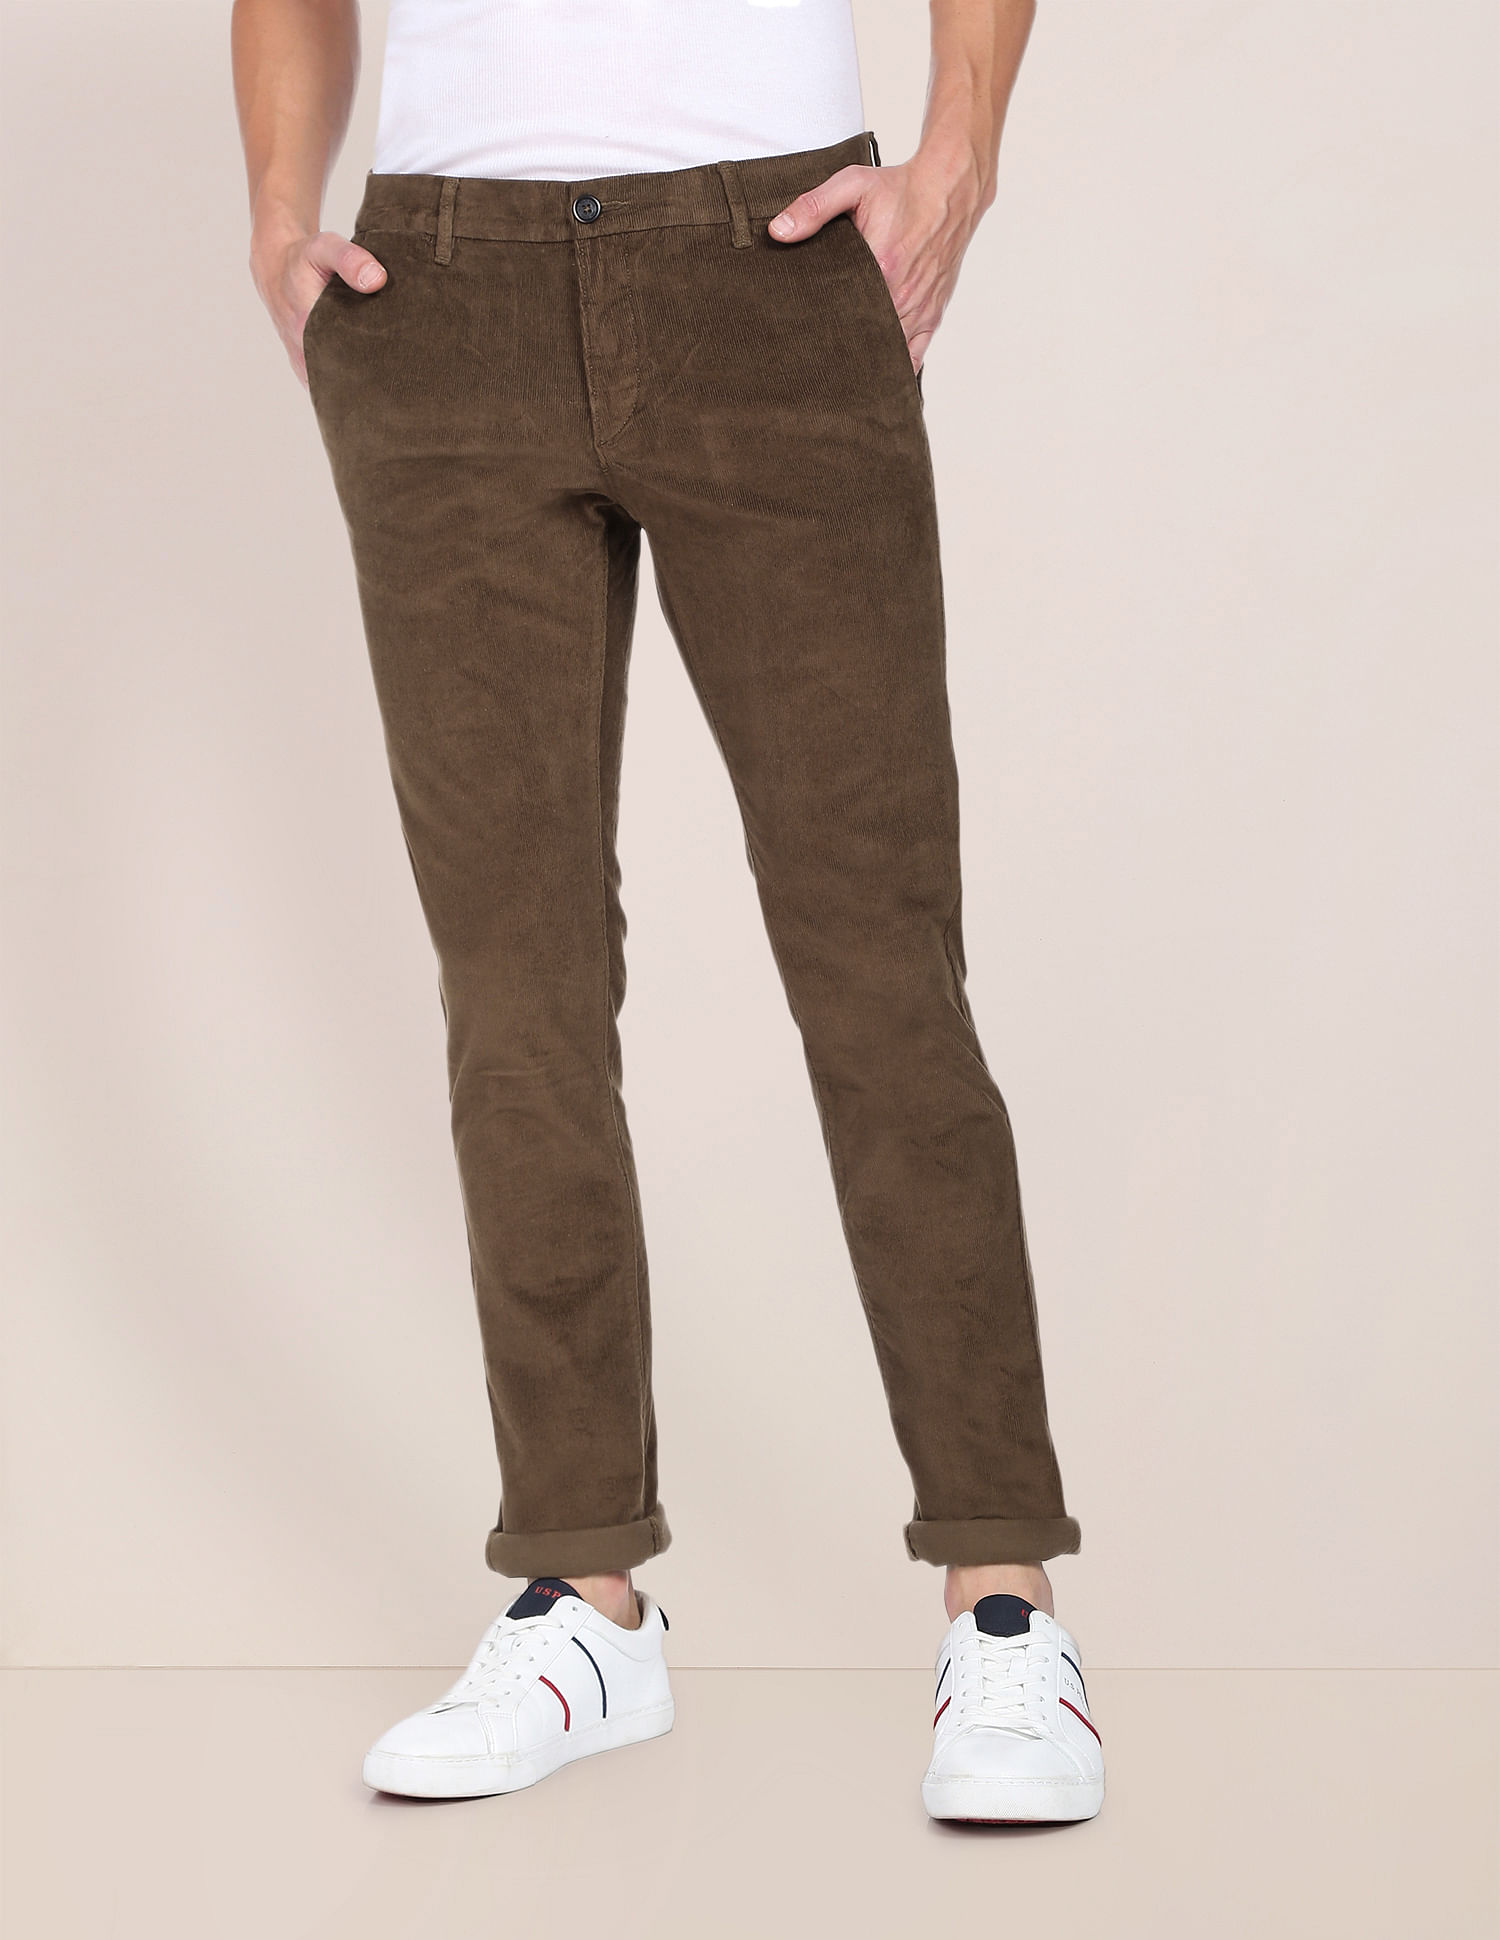 Buy Polo Ralph Lauren Stretch Straight Corduroy Pant  Trousers for Men  7481388  Myntra